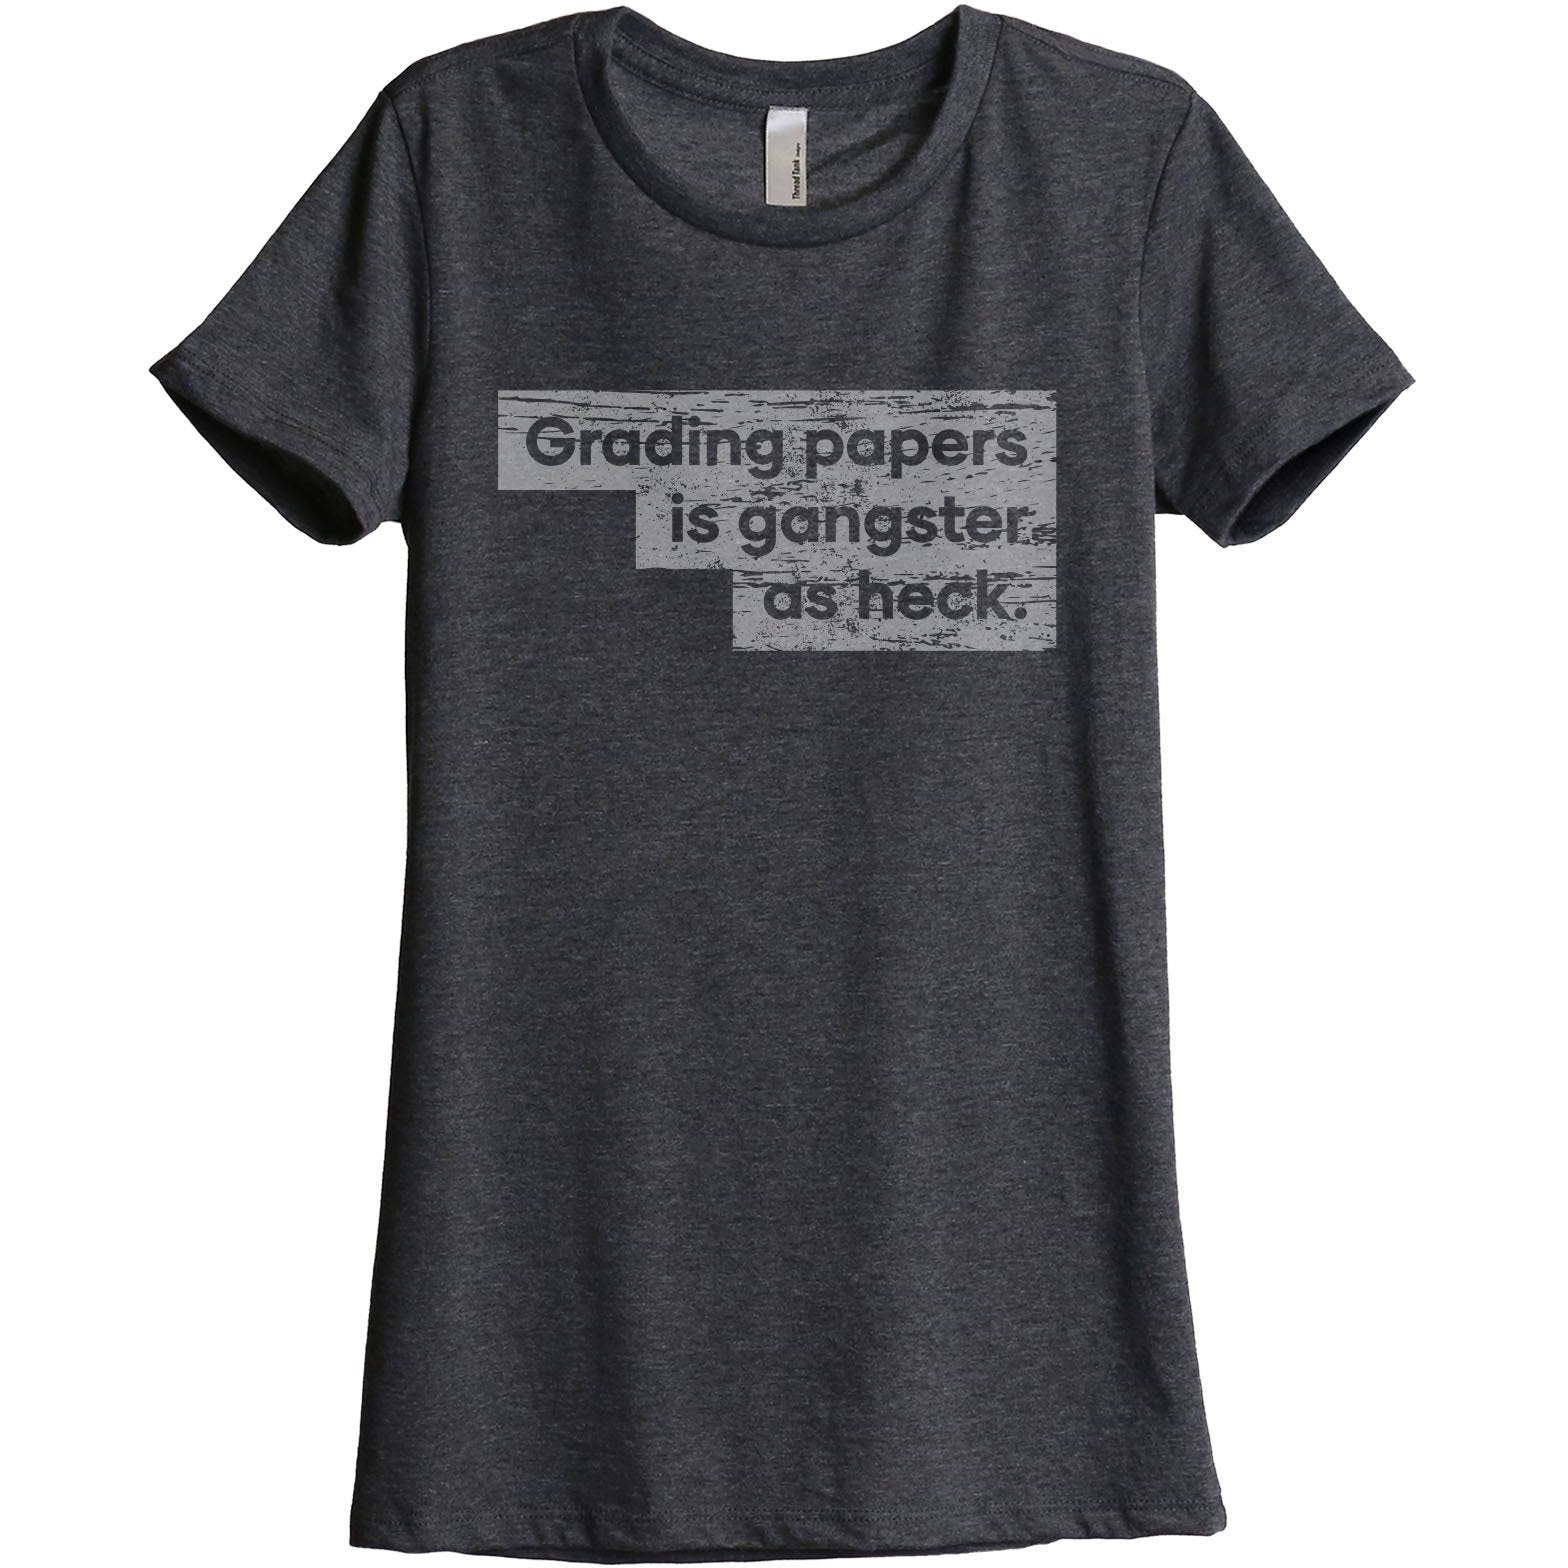 Grading Papers Is Gangster As Heck Women's Relaxed Crewneck T-Shirt Top Tee Charcoal Grey
